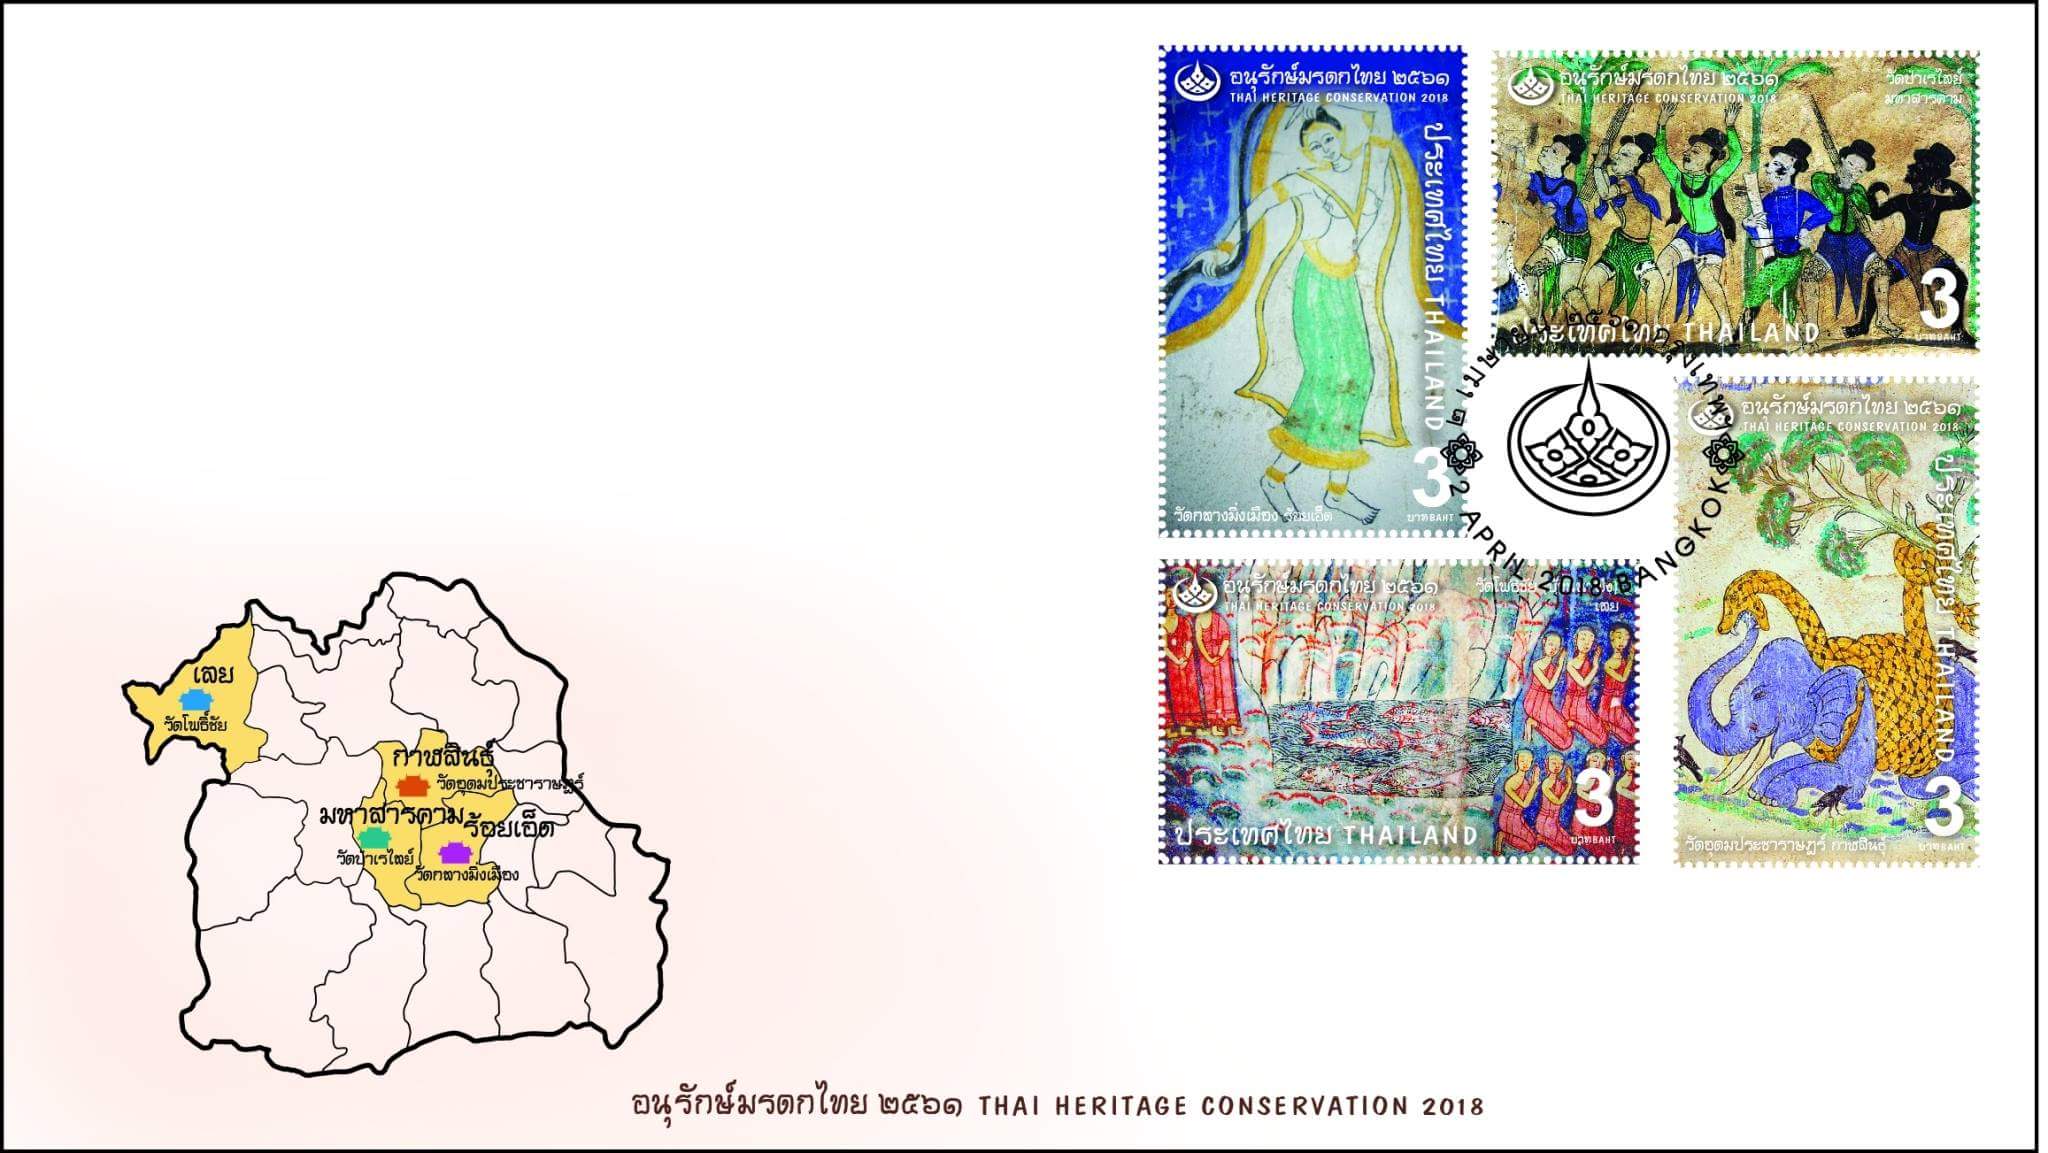 Thailand TH-1144 Thai Heritage Conservation Day 2018 First Day Cover, release date April 2, 2018